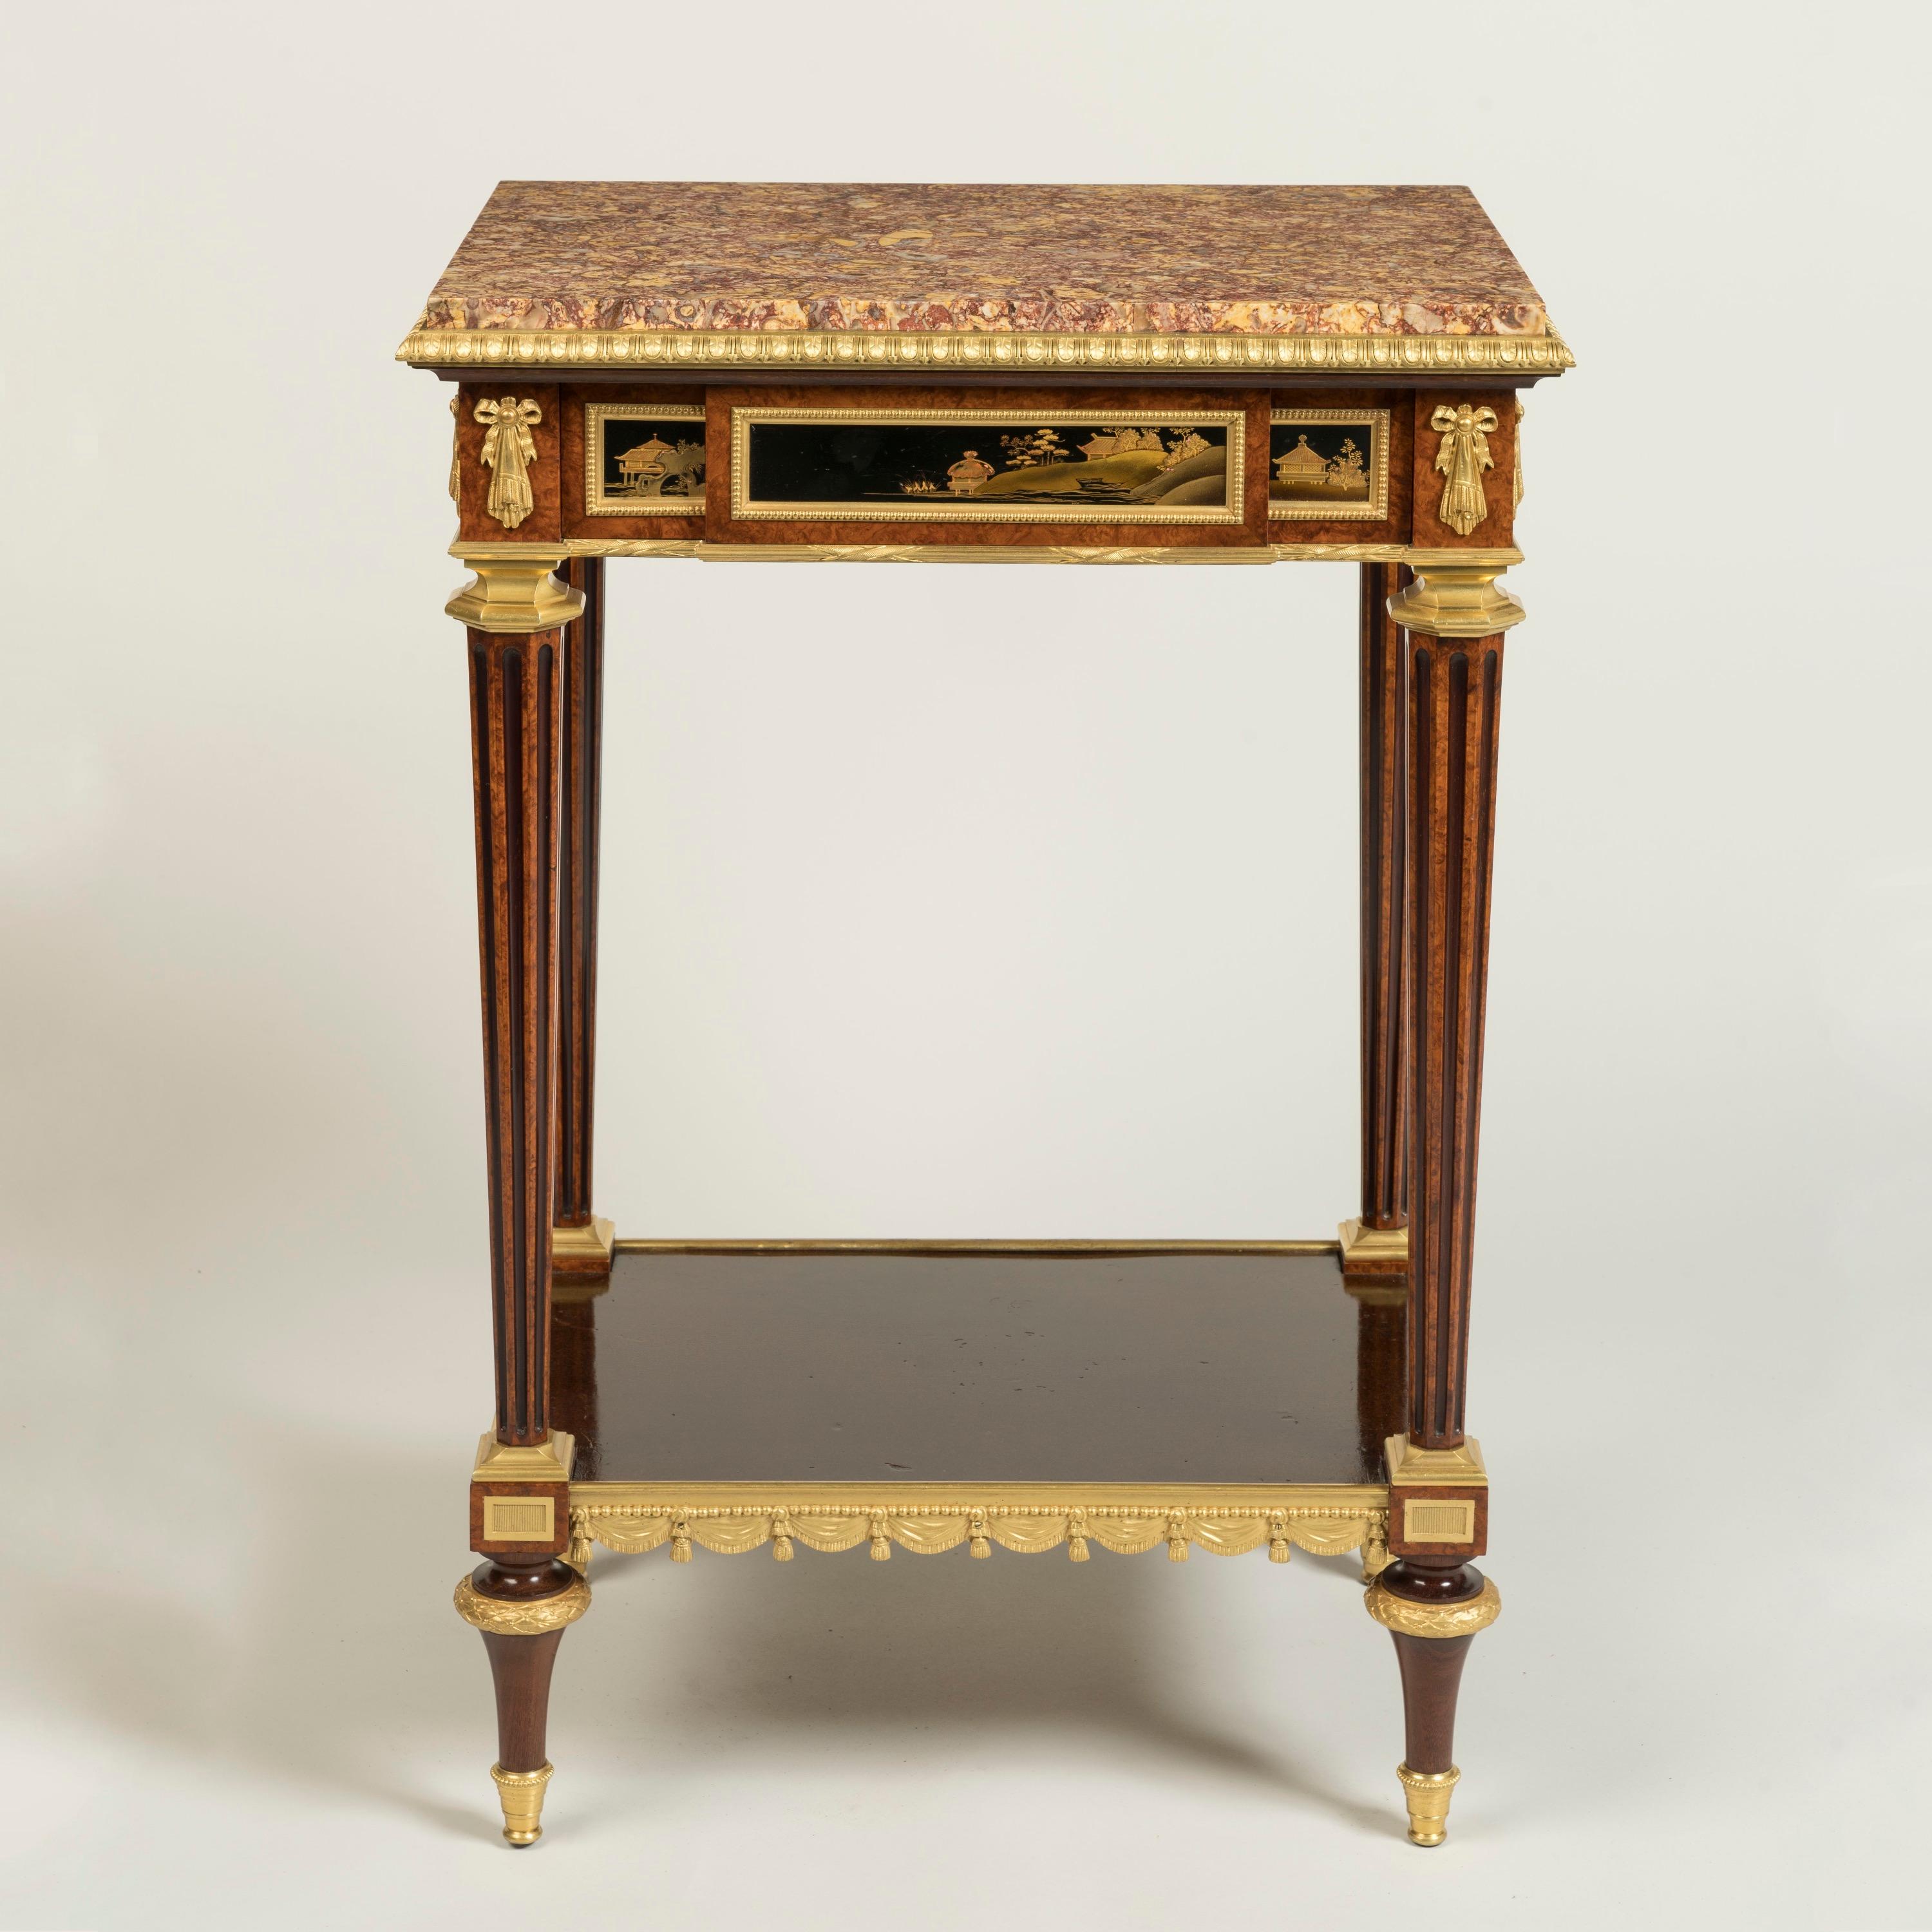 Of rectangular form, constructed in amboyna and mahogany dressed with chinoiserie lacquer panels, and fine ormolu mounts; rising from ormolu mounted toupie feet, supporting the lower platform finished with aventurine gold speckled lacquer, itself